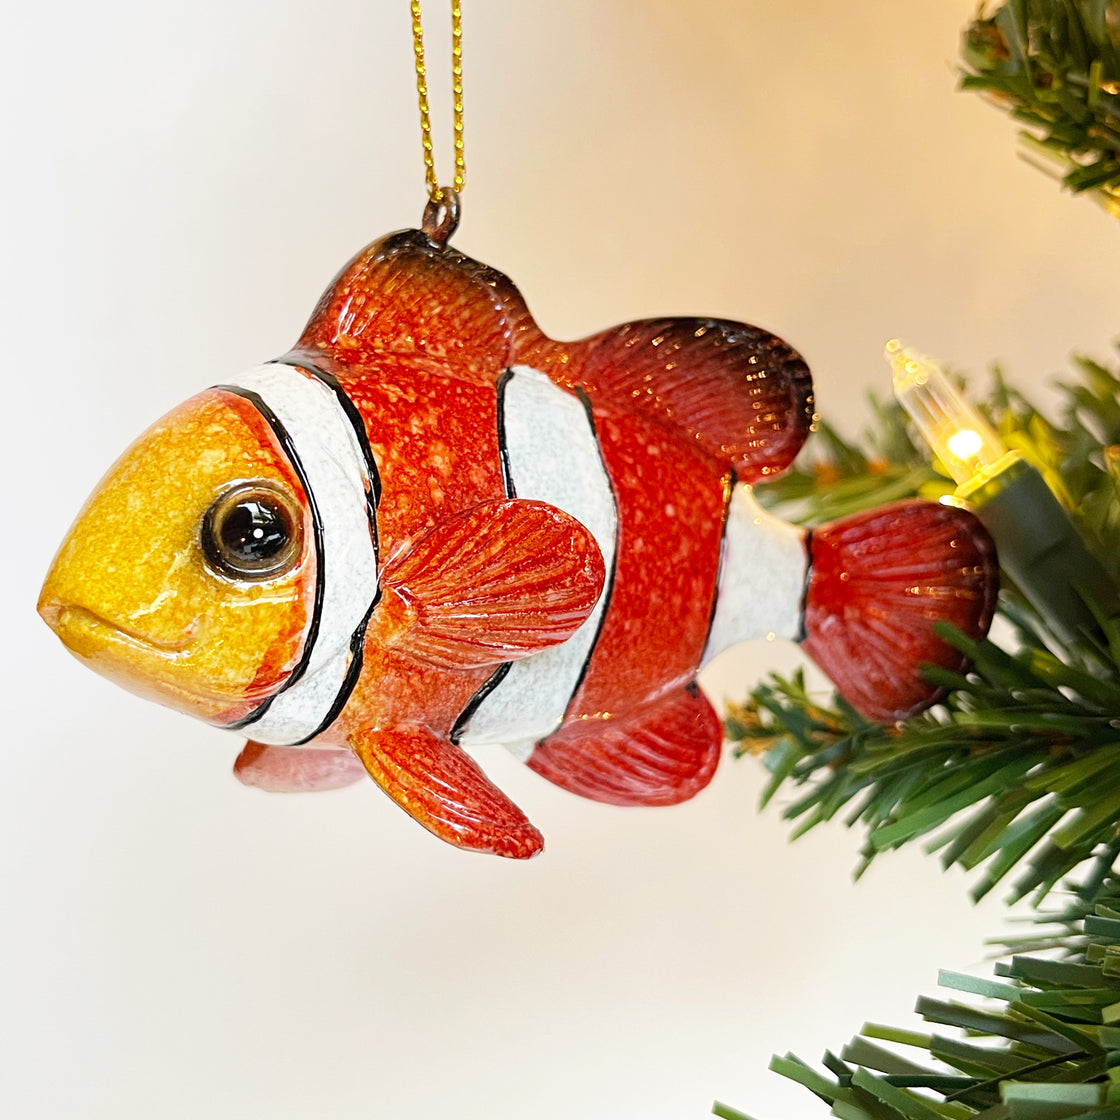 close-up view of rengöra tropical fish ornament with its vivid colors dangles elegantly from a Christmas tree branch adorned with Christmas light